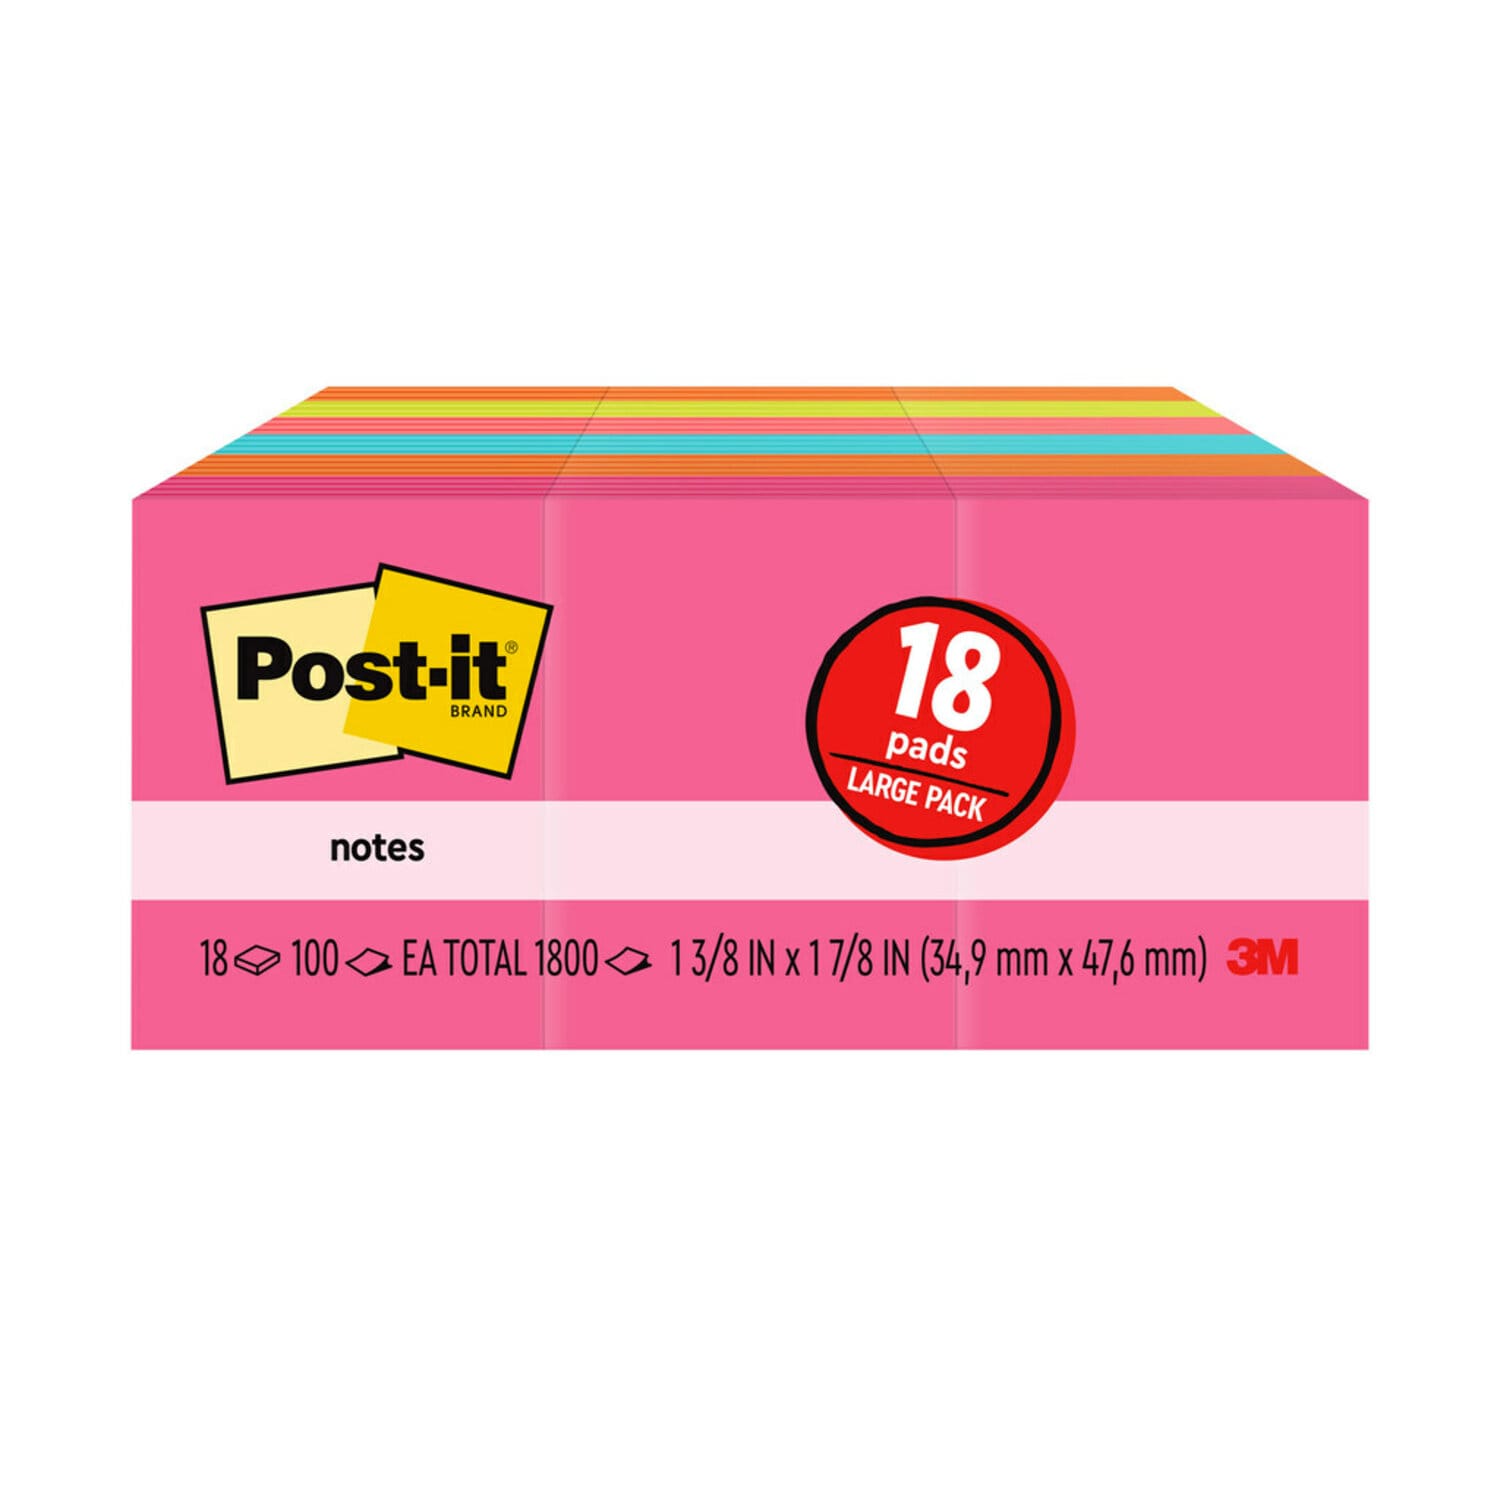 7010311825 - Post-it Notes 653-18AU, 1 3/8 in x 1 7/8 in (34,9 mm x 47,6 mm) Cape Town Colors, 18 Pads/Pack, 100 Sheets/Pad